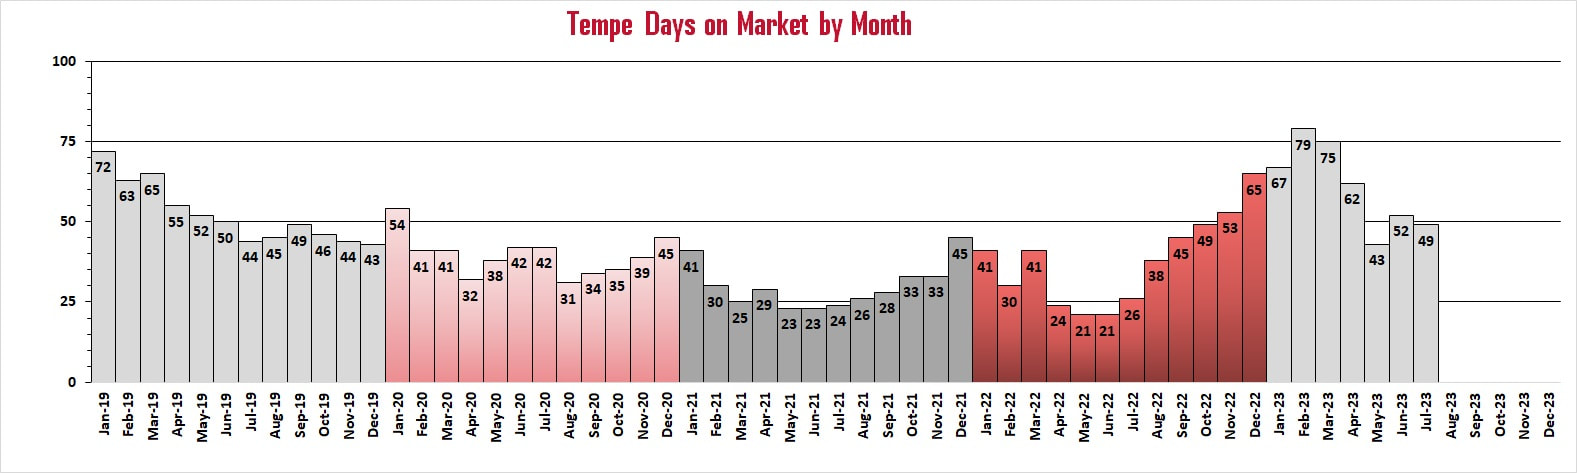 Tempe Days on Market by Month | Troy Erickson Realtor